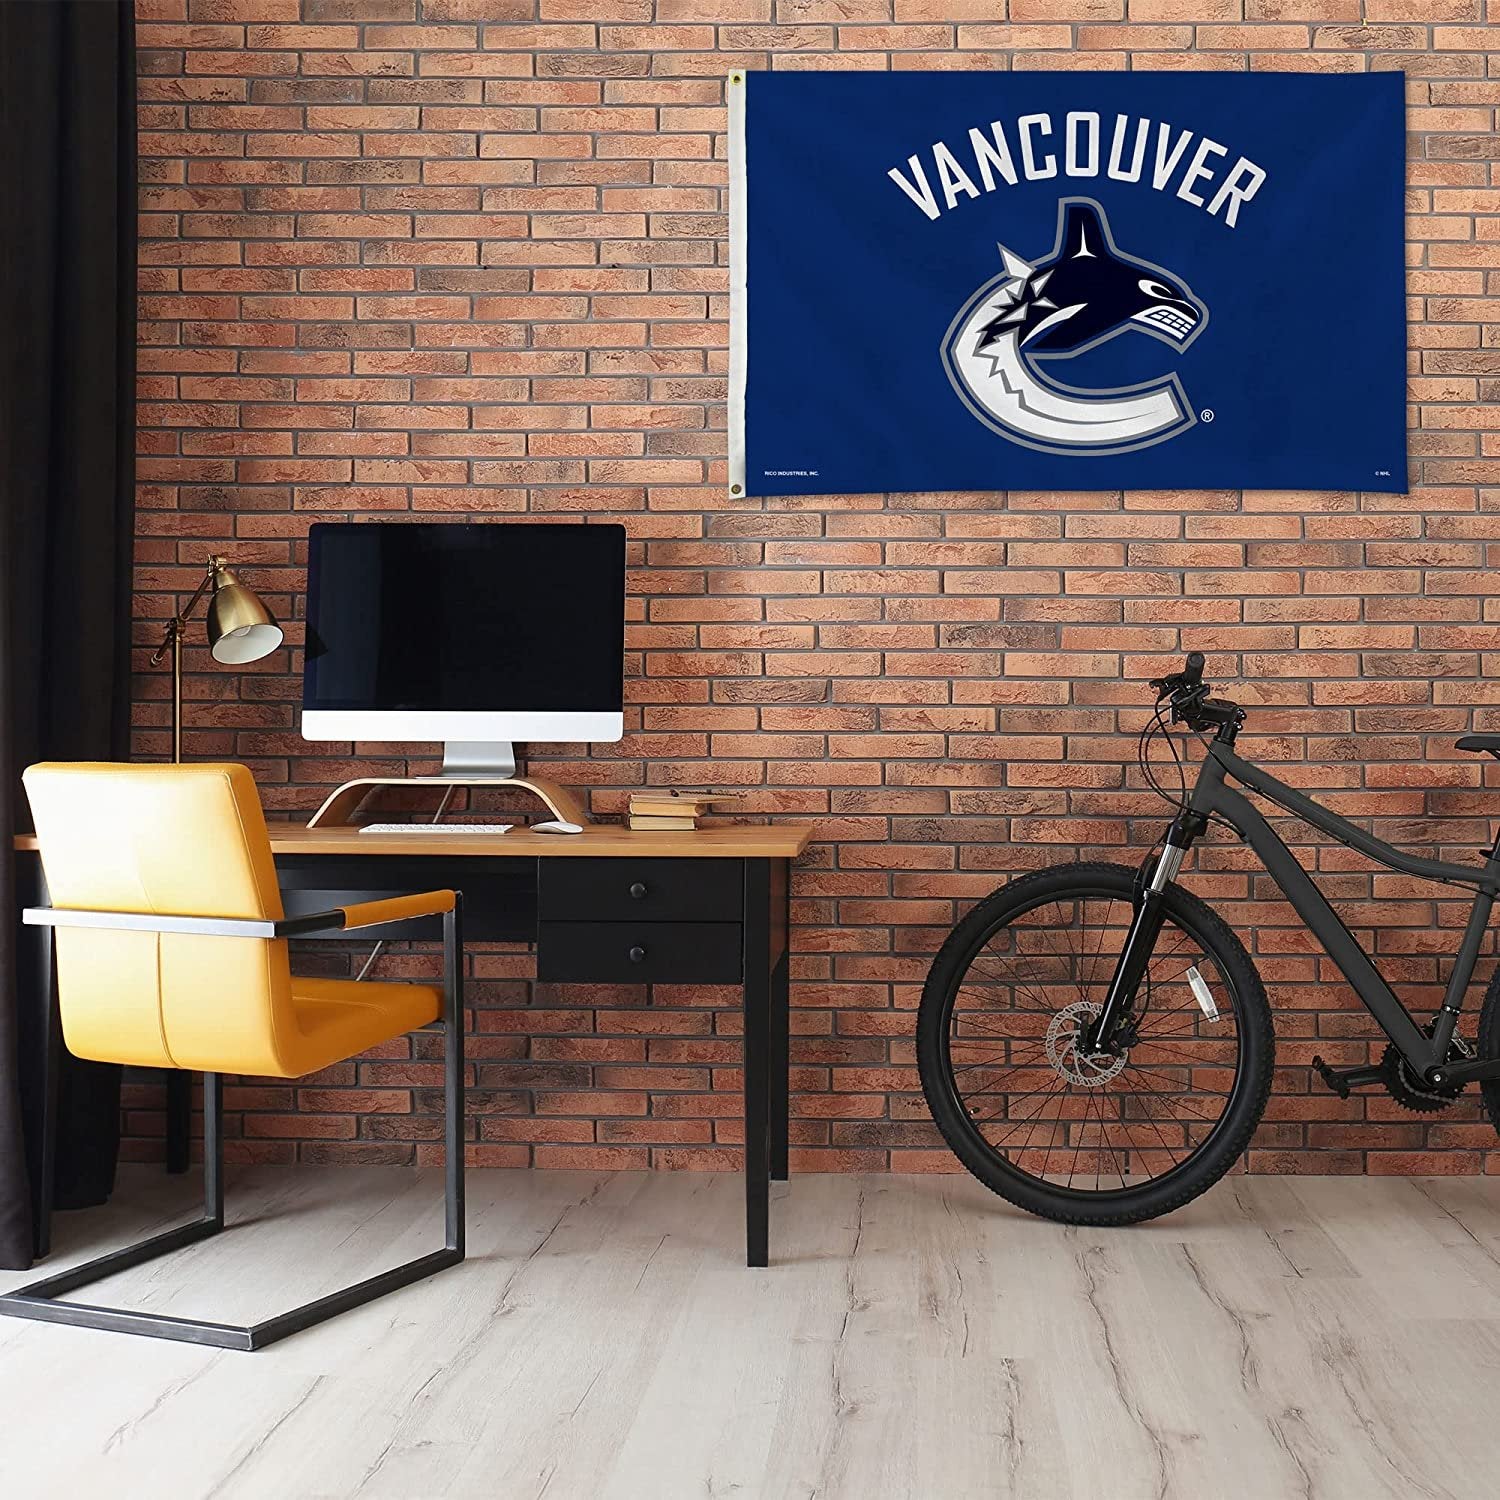 Vancouver Canucks 3x5 Flag Metal Grommets Outdoor House Banner